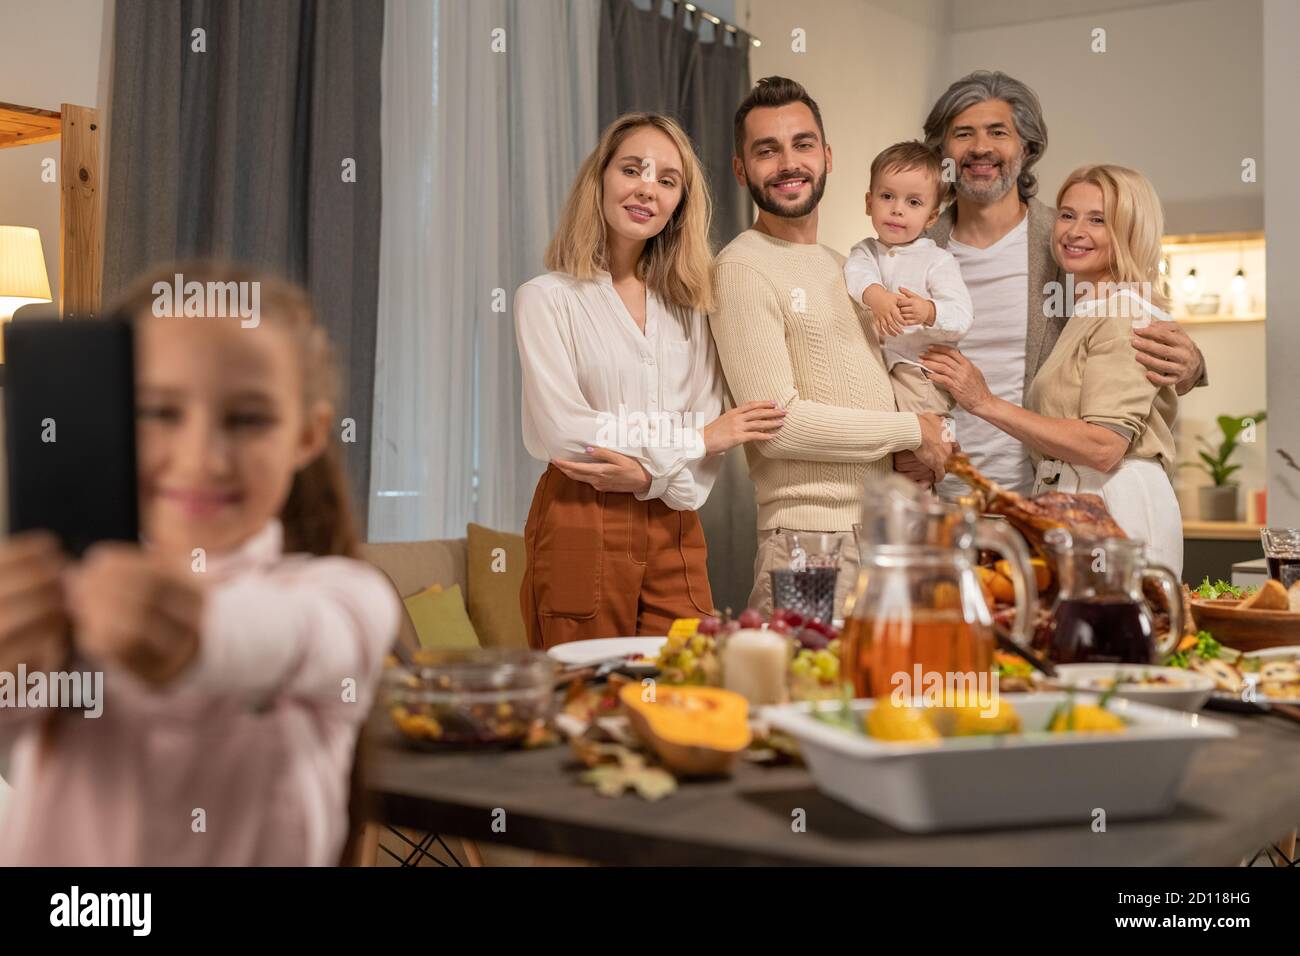 Joyful large family standing by festive table and looking at smartphone camera Stock Photo